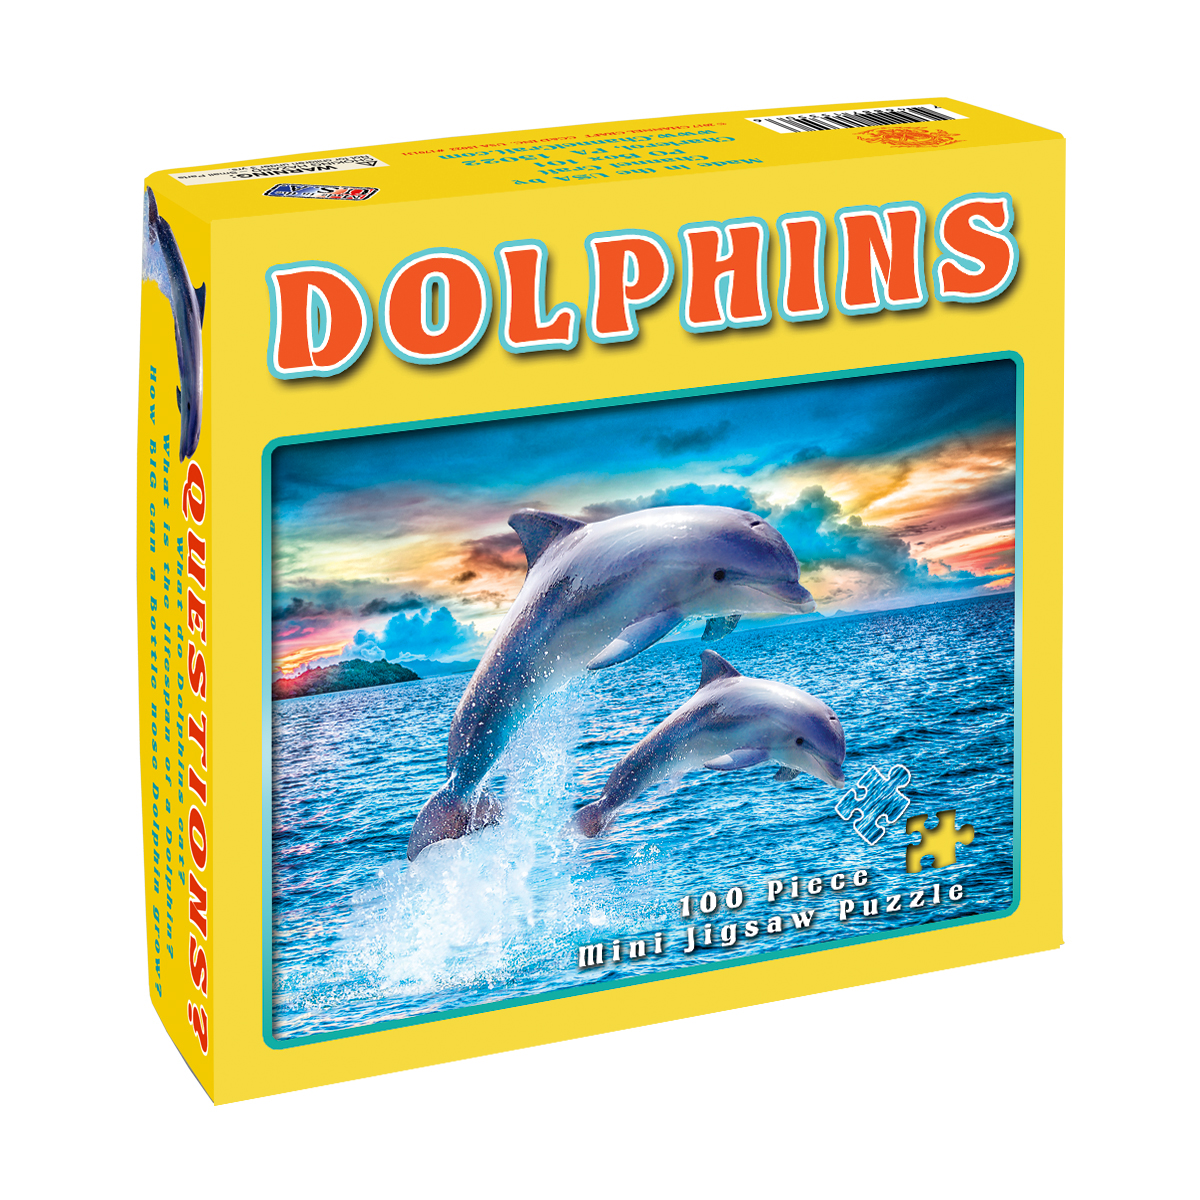 Dolphins Mini Puzzle Dolphin Jigsaw Puzzle